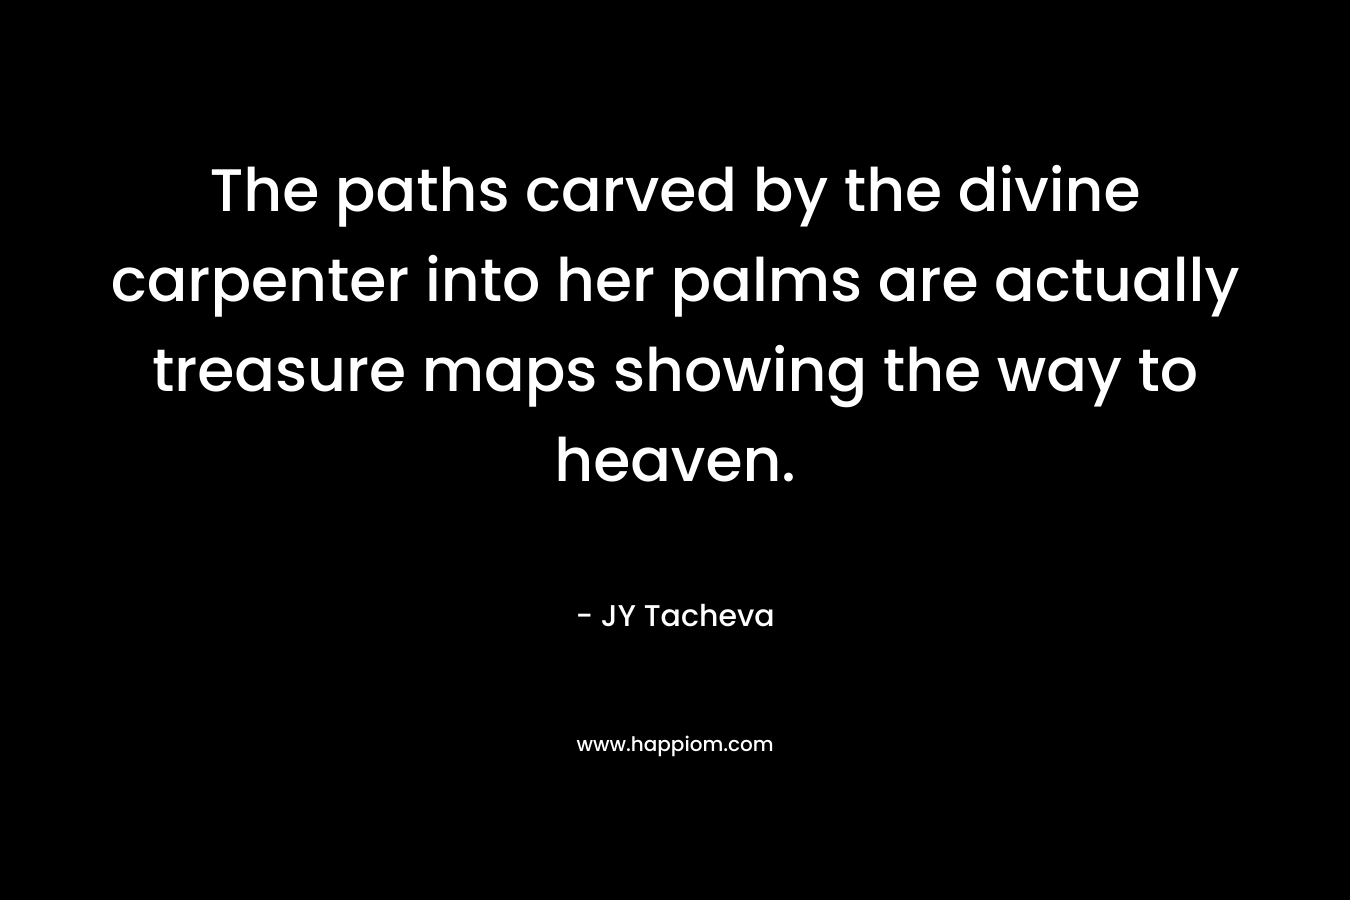 The paths carved by the divine carpenter into her palms are actually treasure maps showing the way to heaven.